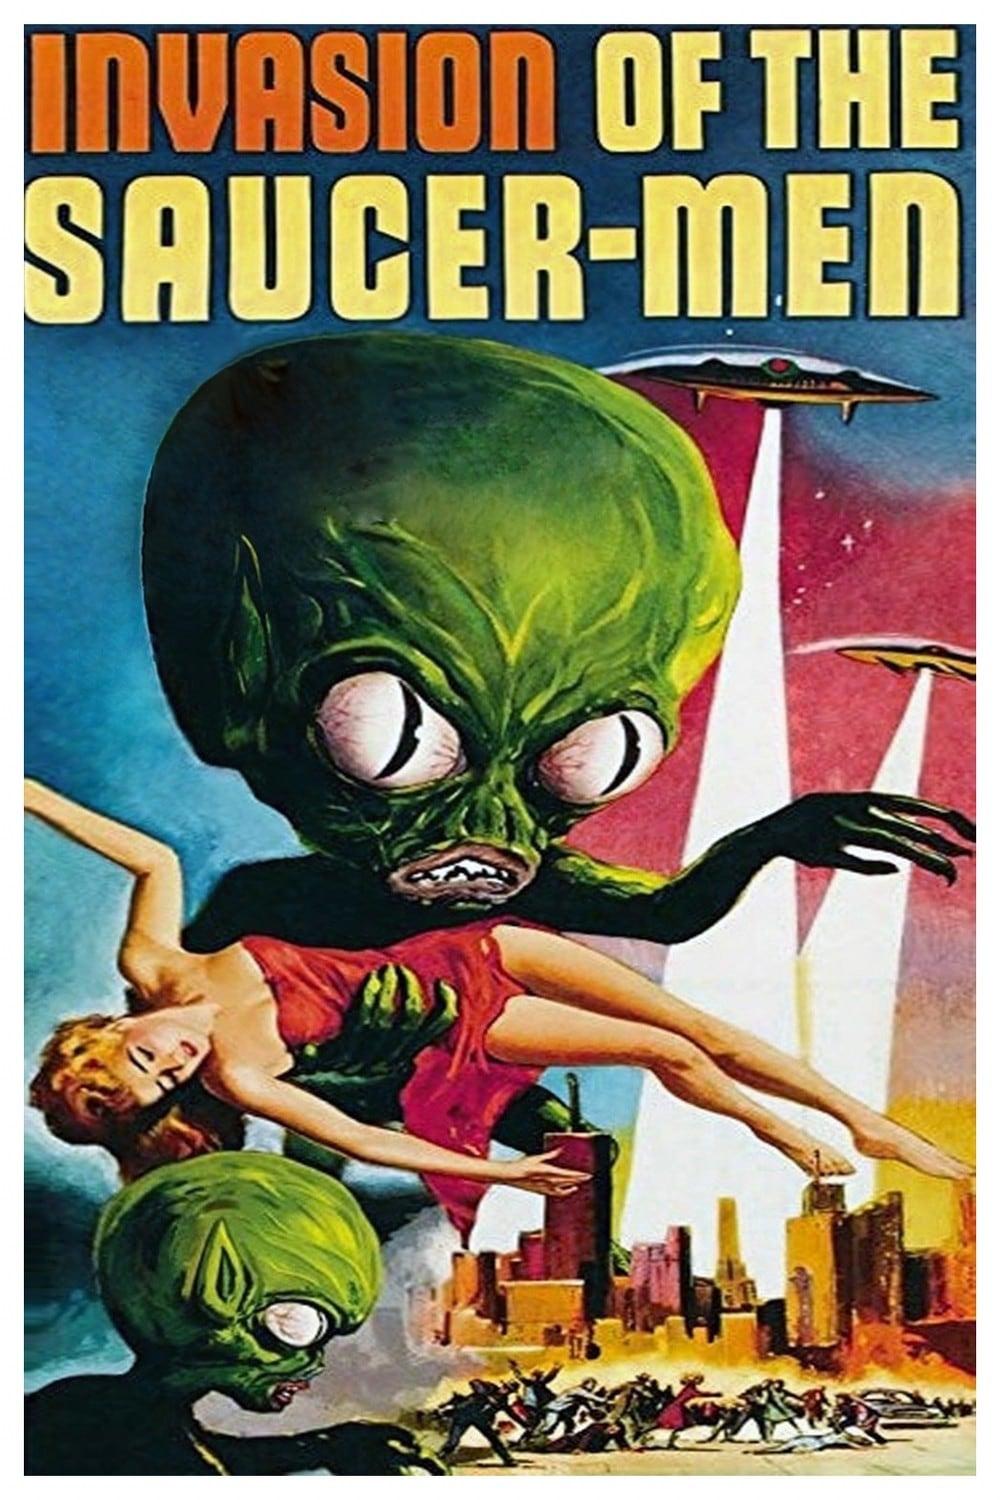 Invasion of the Saucer-Men poster